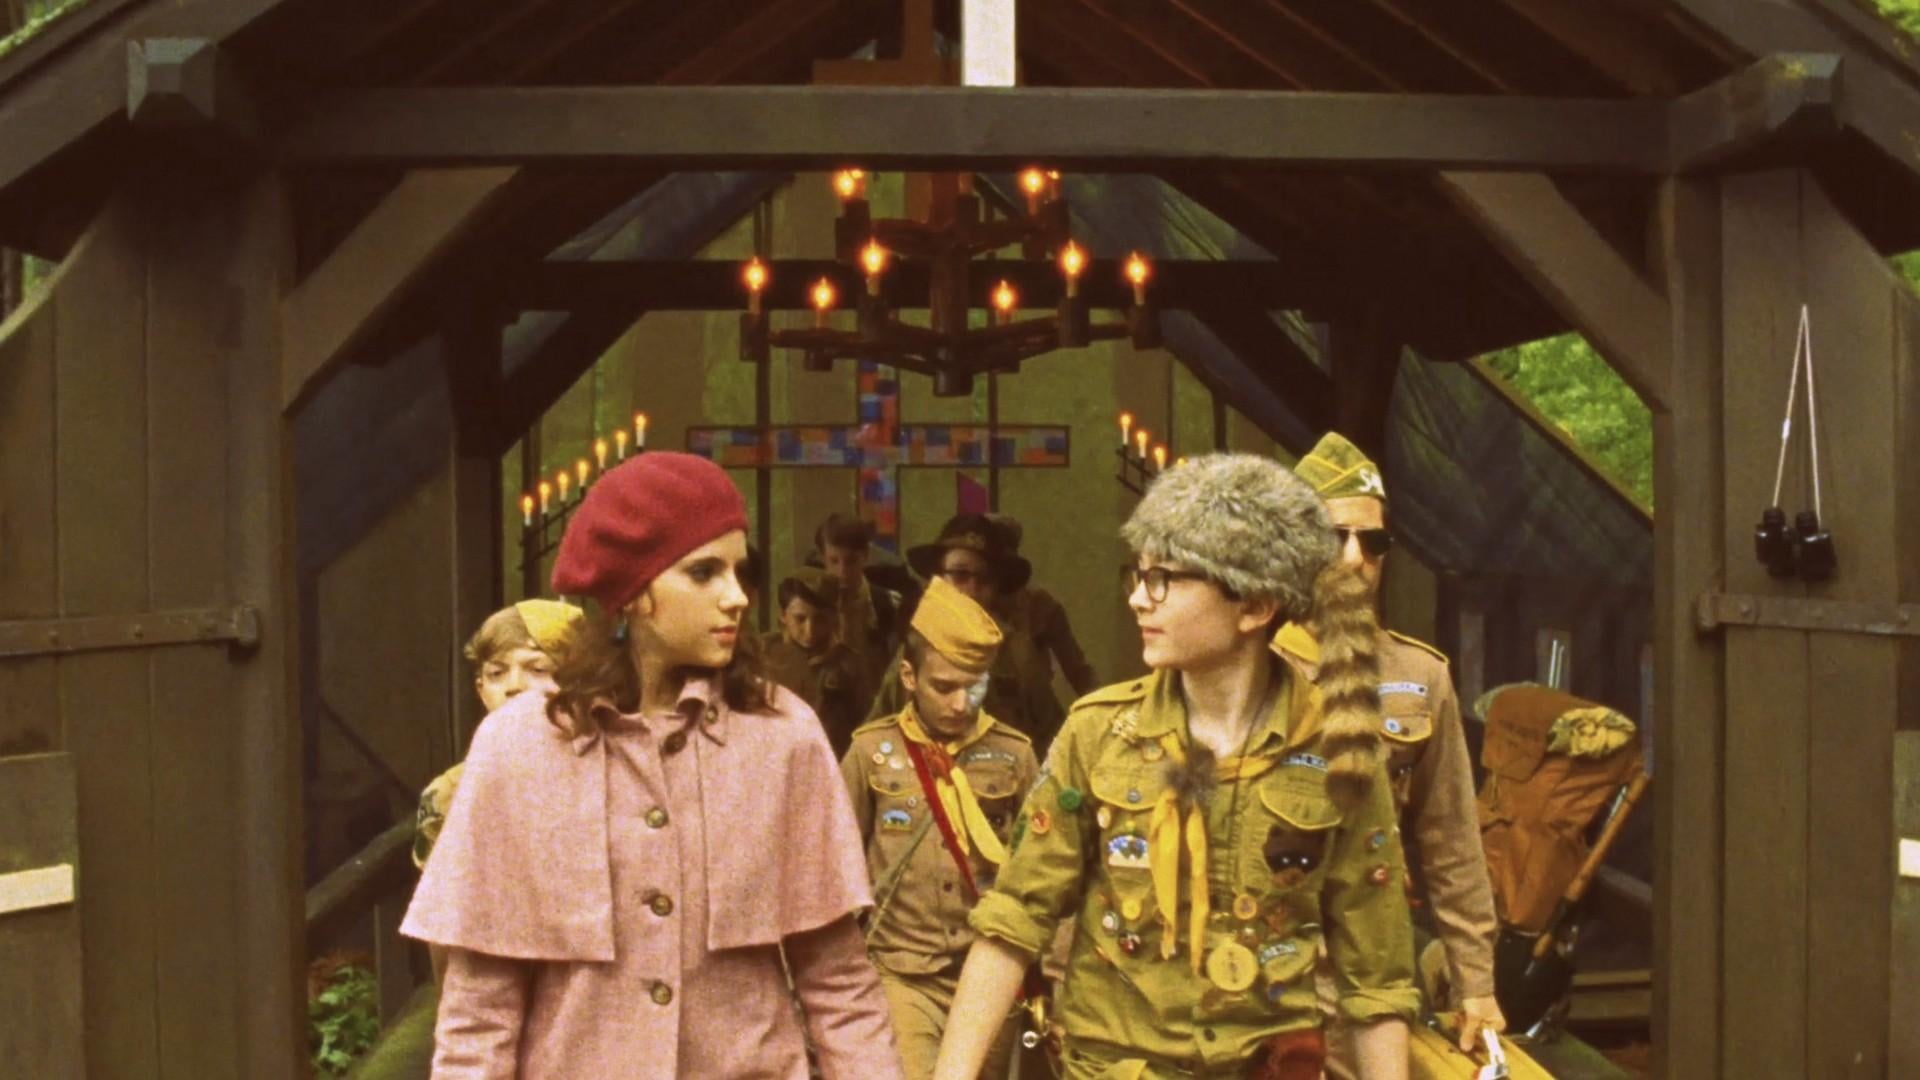 Top 17 Wes Anderson Films for Cinema Lovers